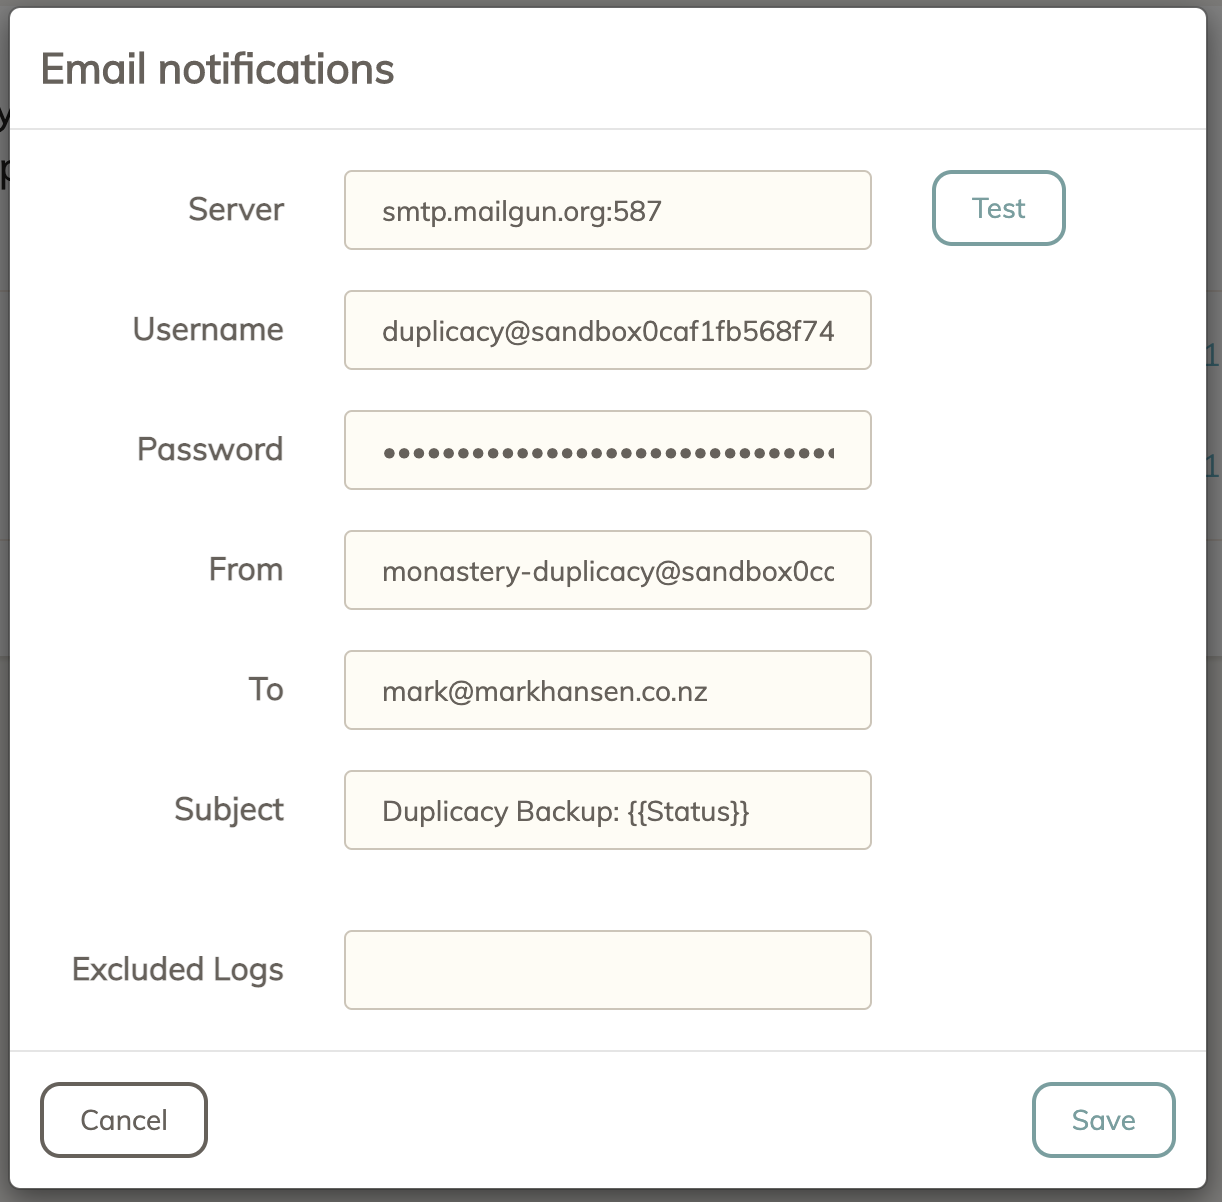 Duplicacy email notifications dialog. Server